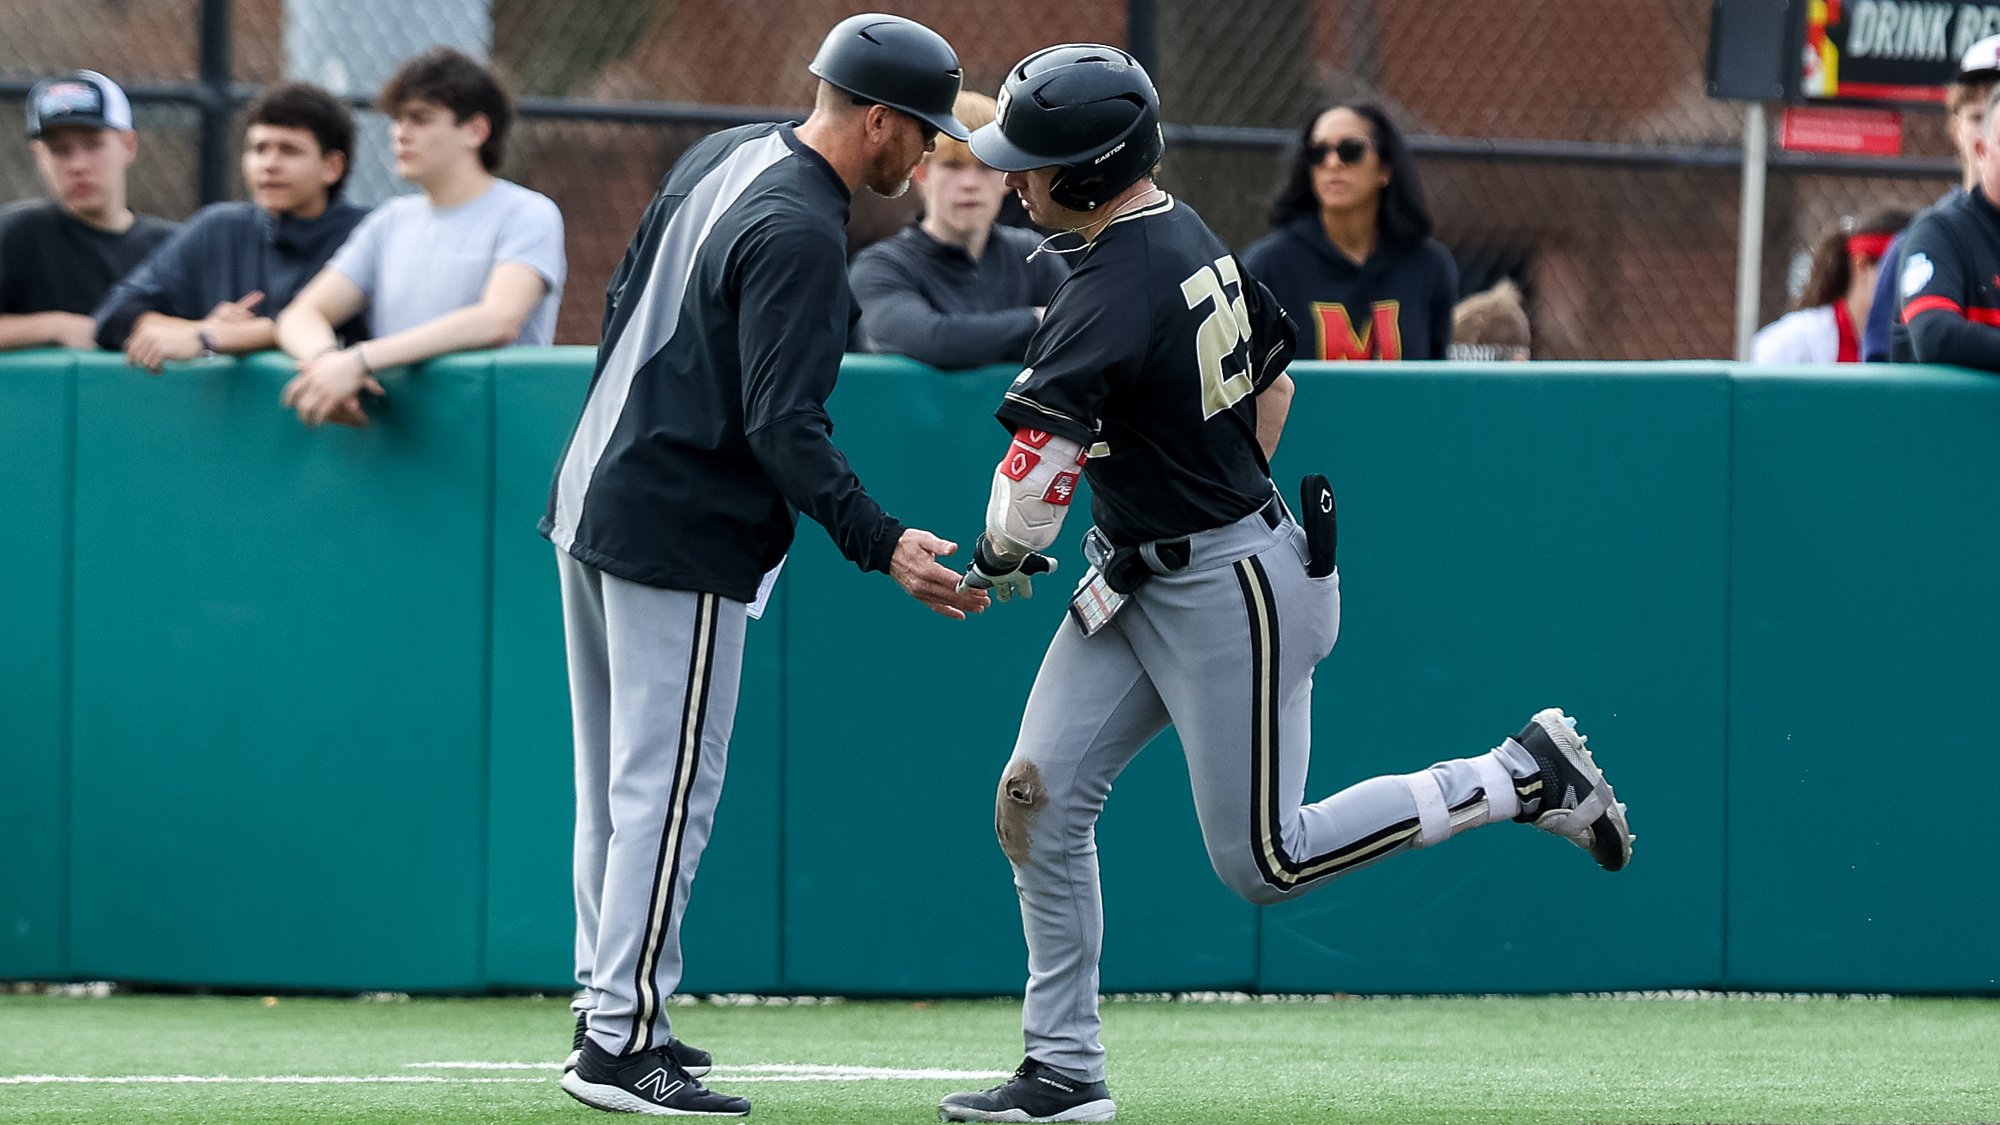 Baruch's grand slam lifts Bryant past Iona on Saturday